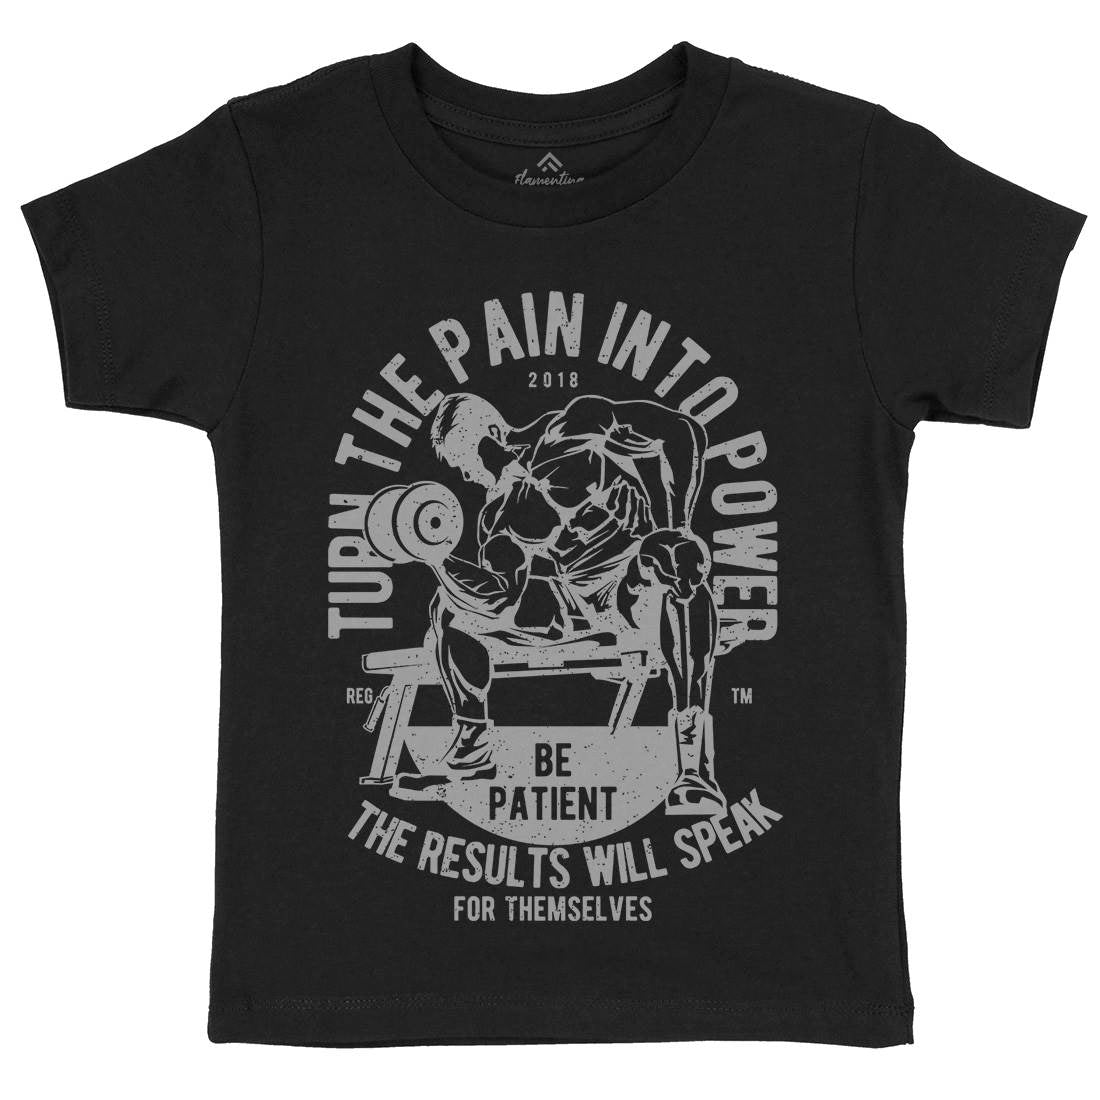 Turn The Pain Into Power Kids Crew Neck T-Shirt Gym A780